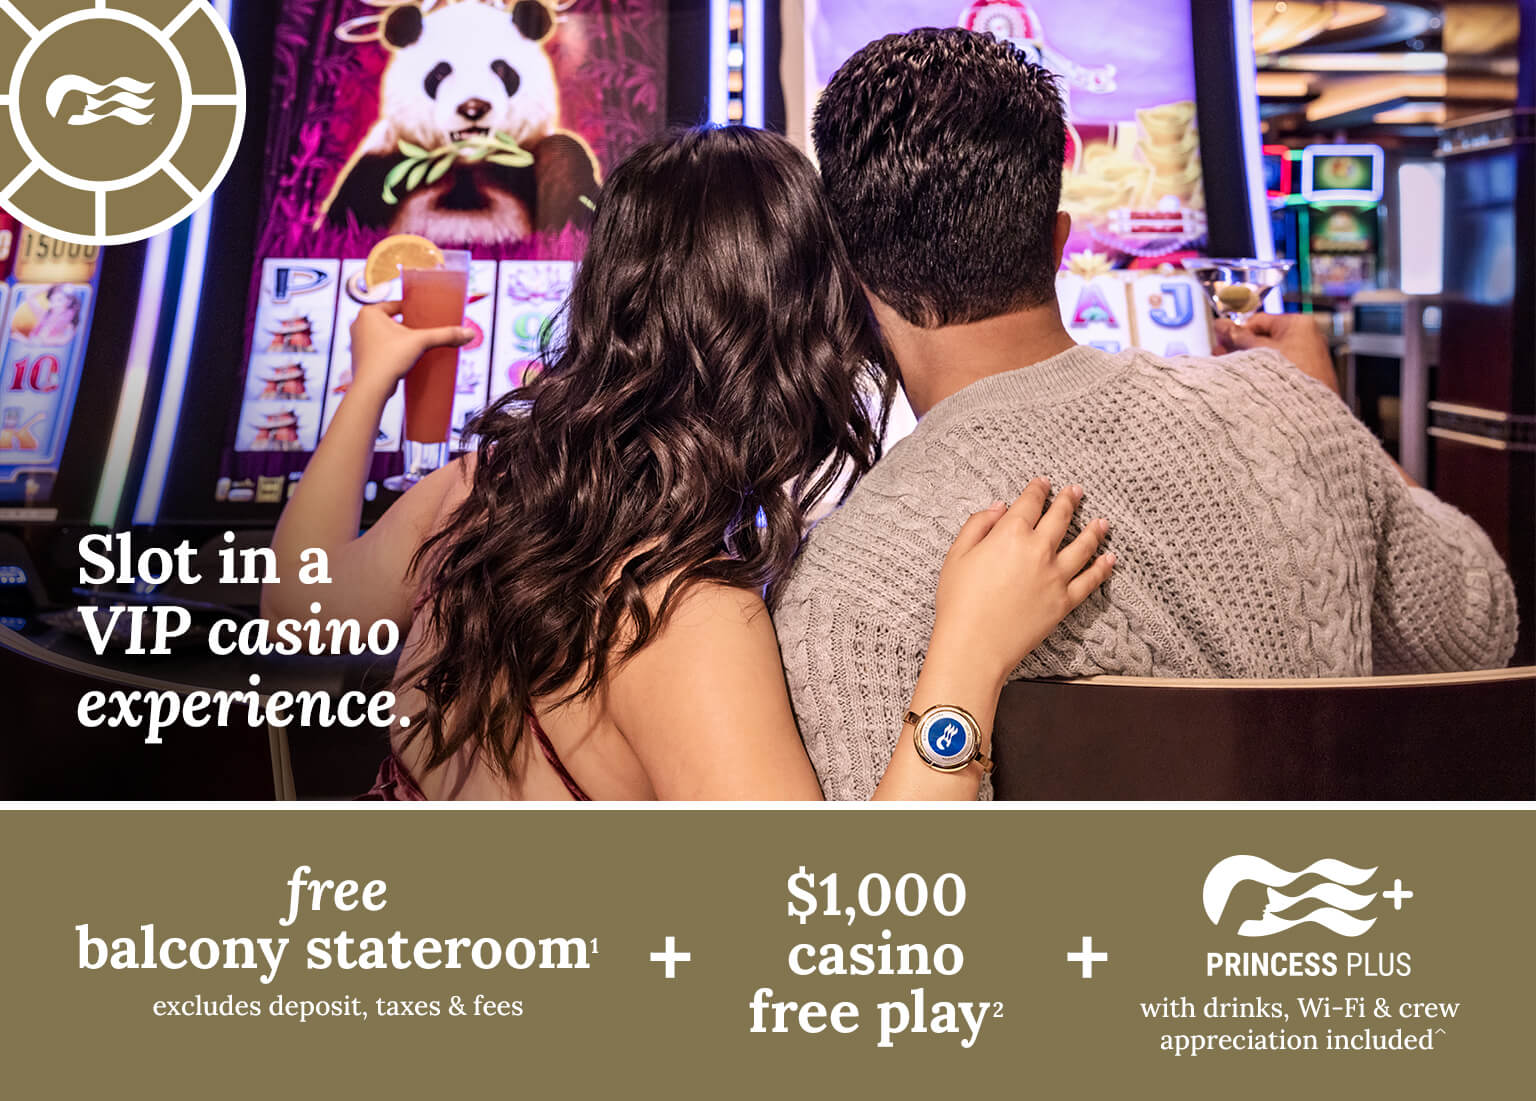 Slot in a VIP casino experience. Free balcony stateroom + $1000 casino free play + princess plus with drinks, Wi-Fi, and crew appreciation included